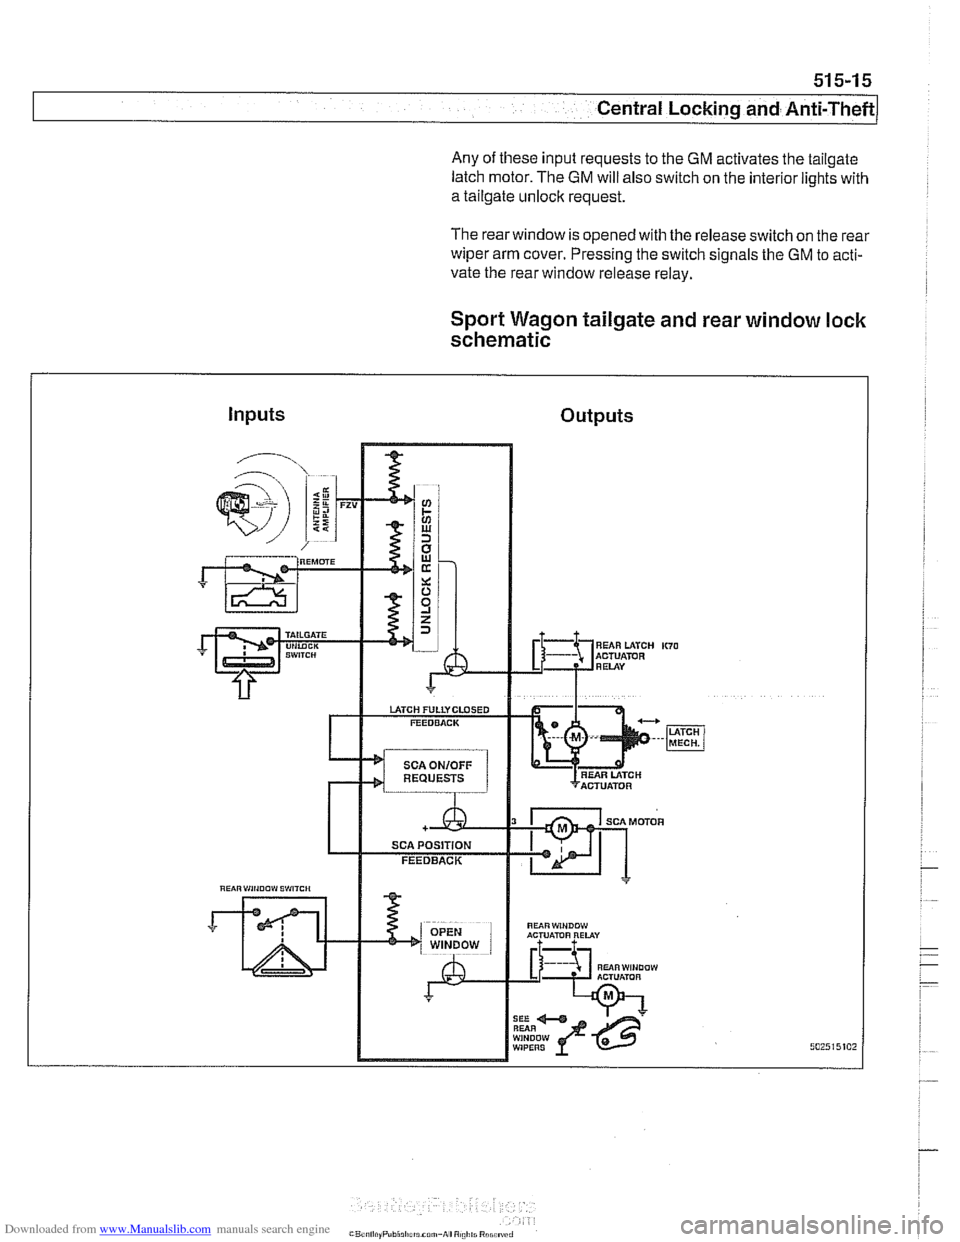 BMW 540i 1997 E39 Workshop Manual Downloaded from www.Manualslib.com manuals search engine 
51 5-1 5 
Central Locking and Anti-Theft 
Any  of these input requests to  the GM activates  the tailgate 
latch motor.  The 
GM will also swi